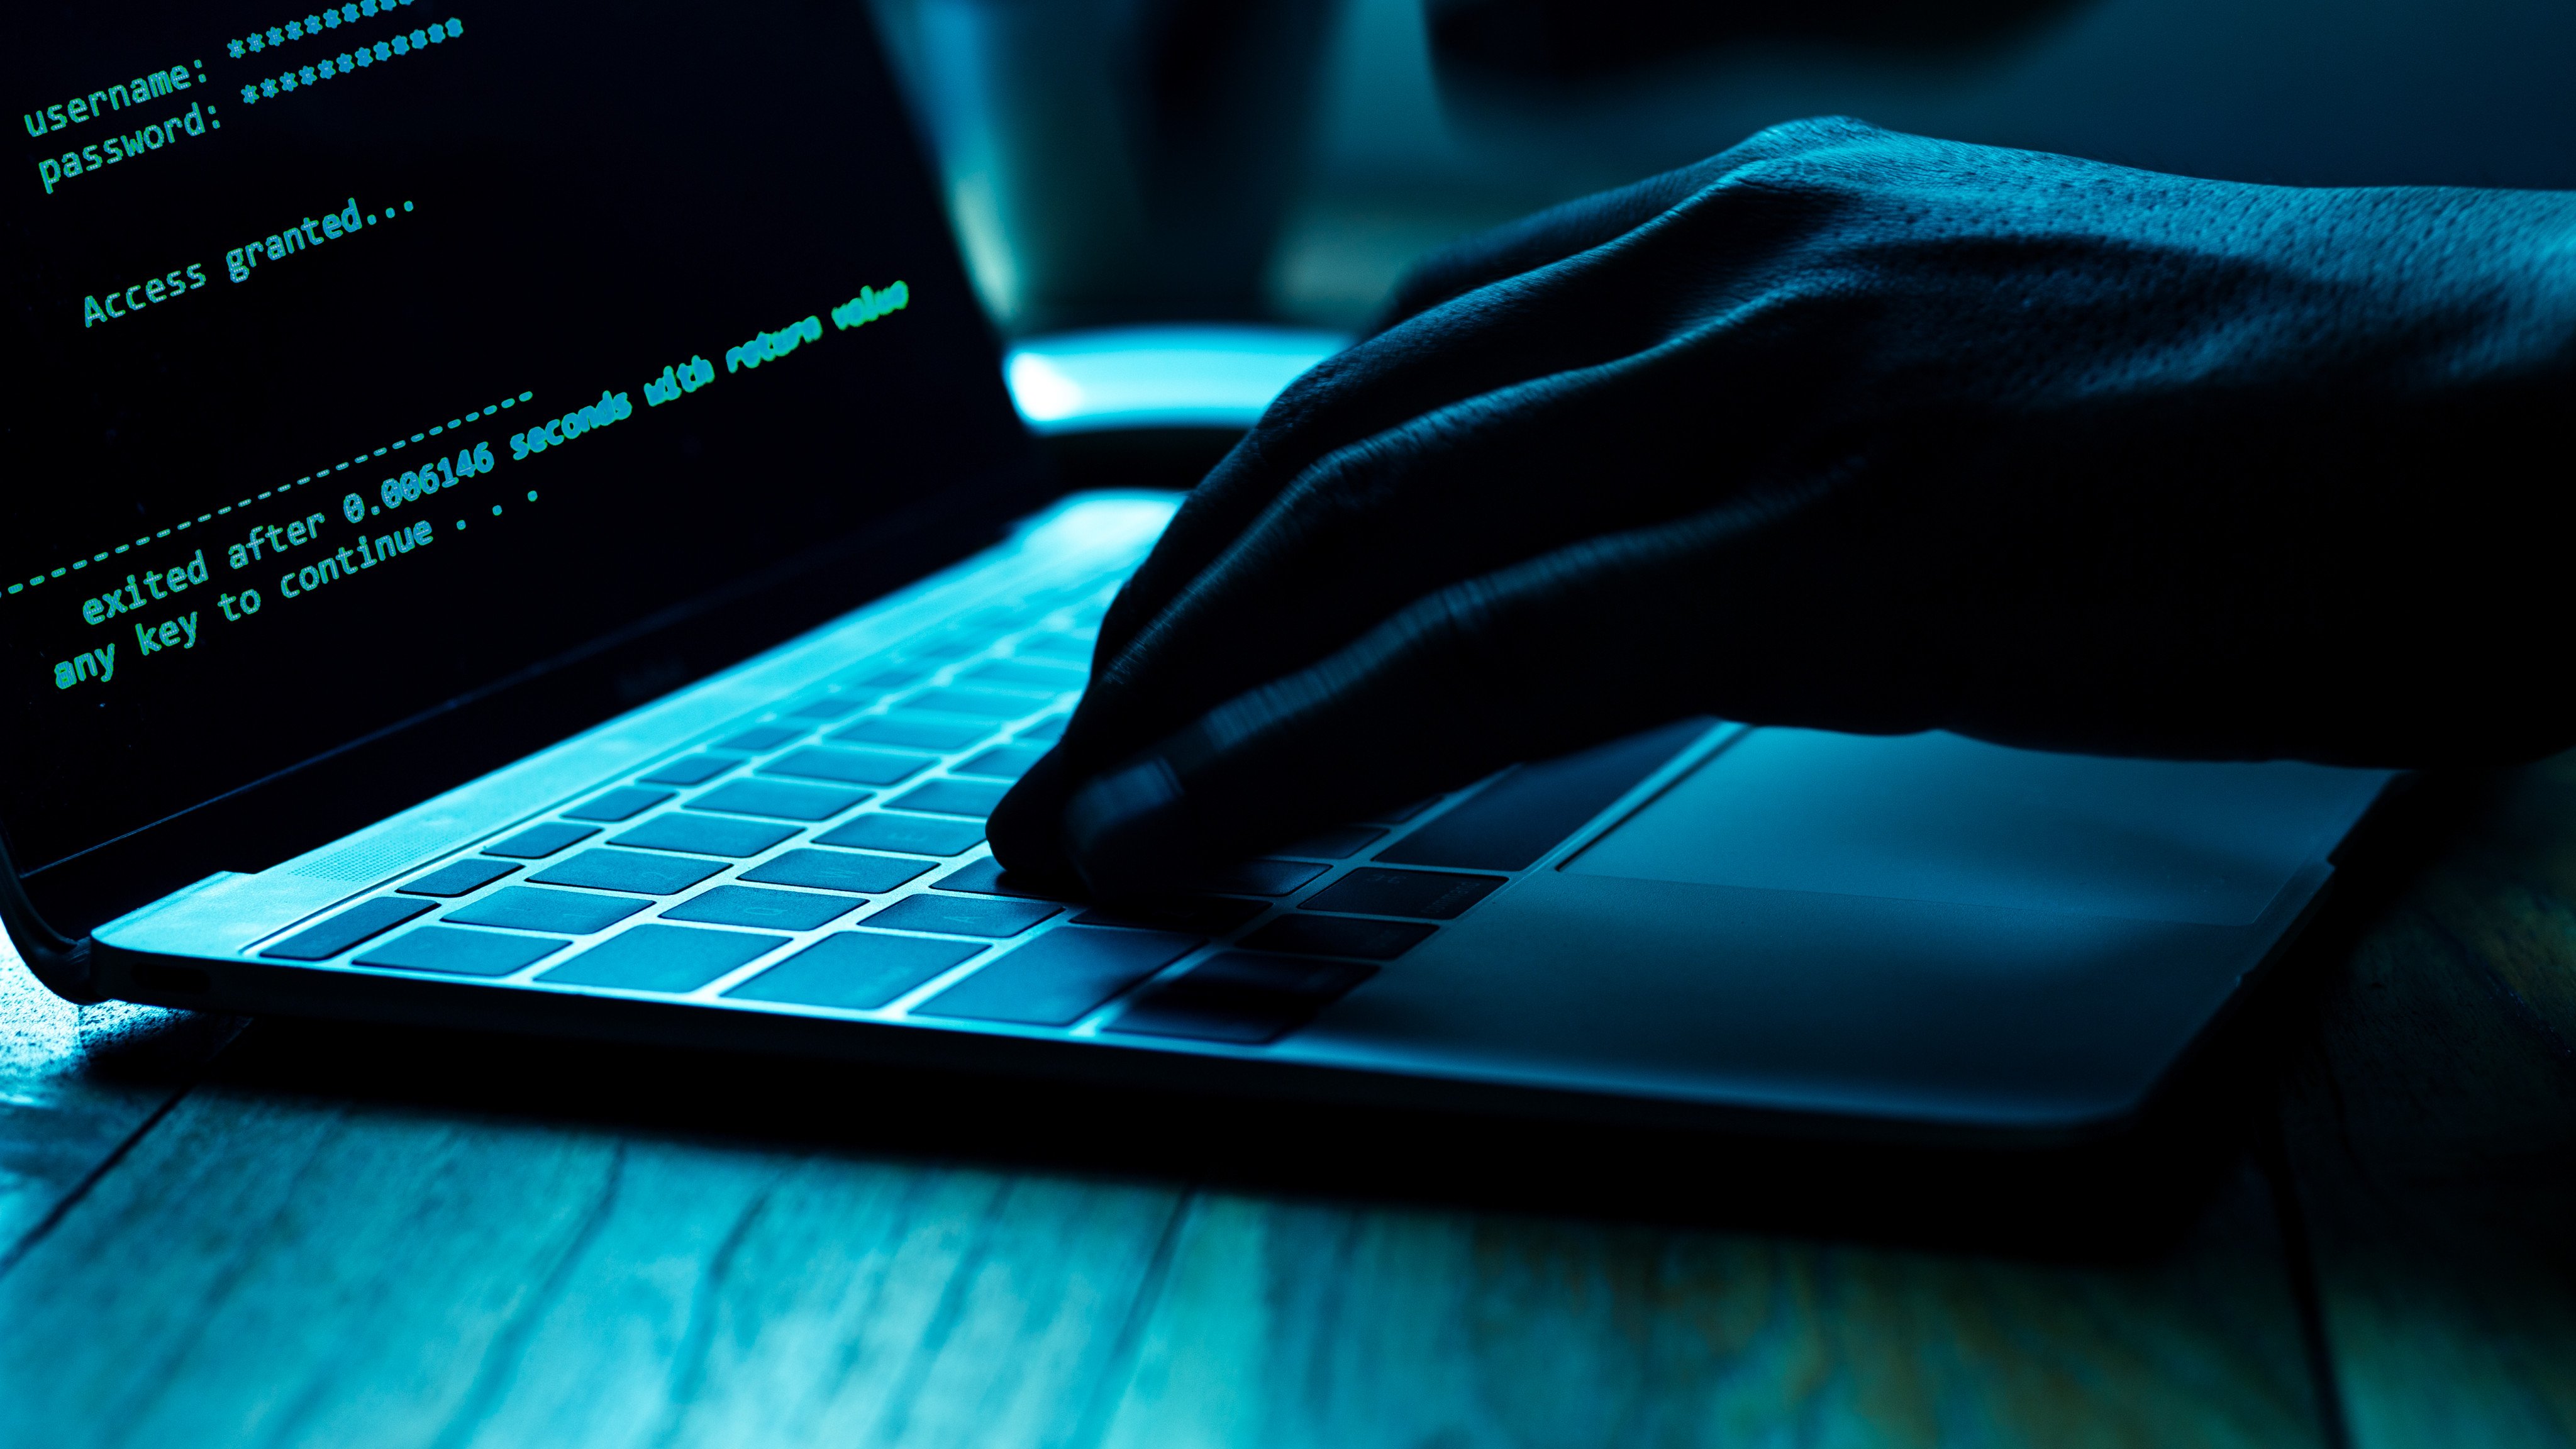 The government’s IT experts have asked for an urgent cybersecurity review across the administration after reports of two major data breaches. Photo: Shutterstock 